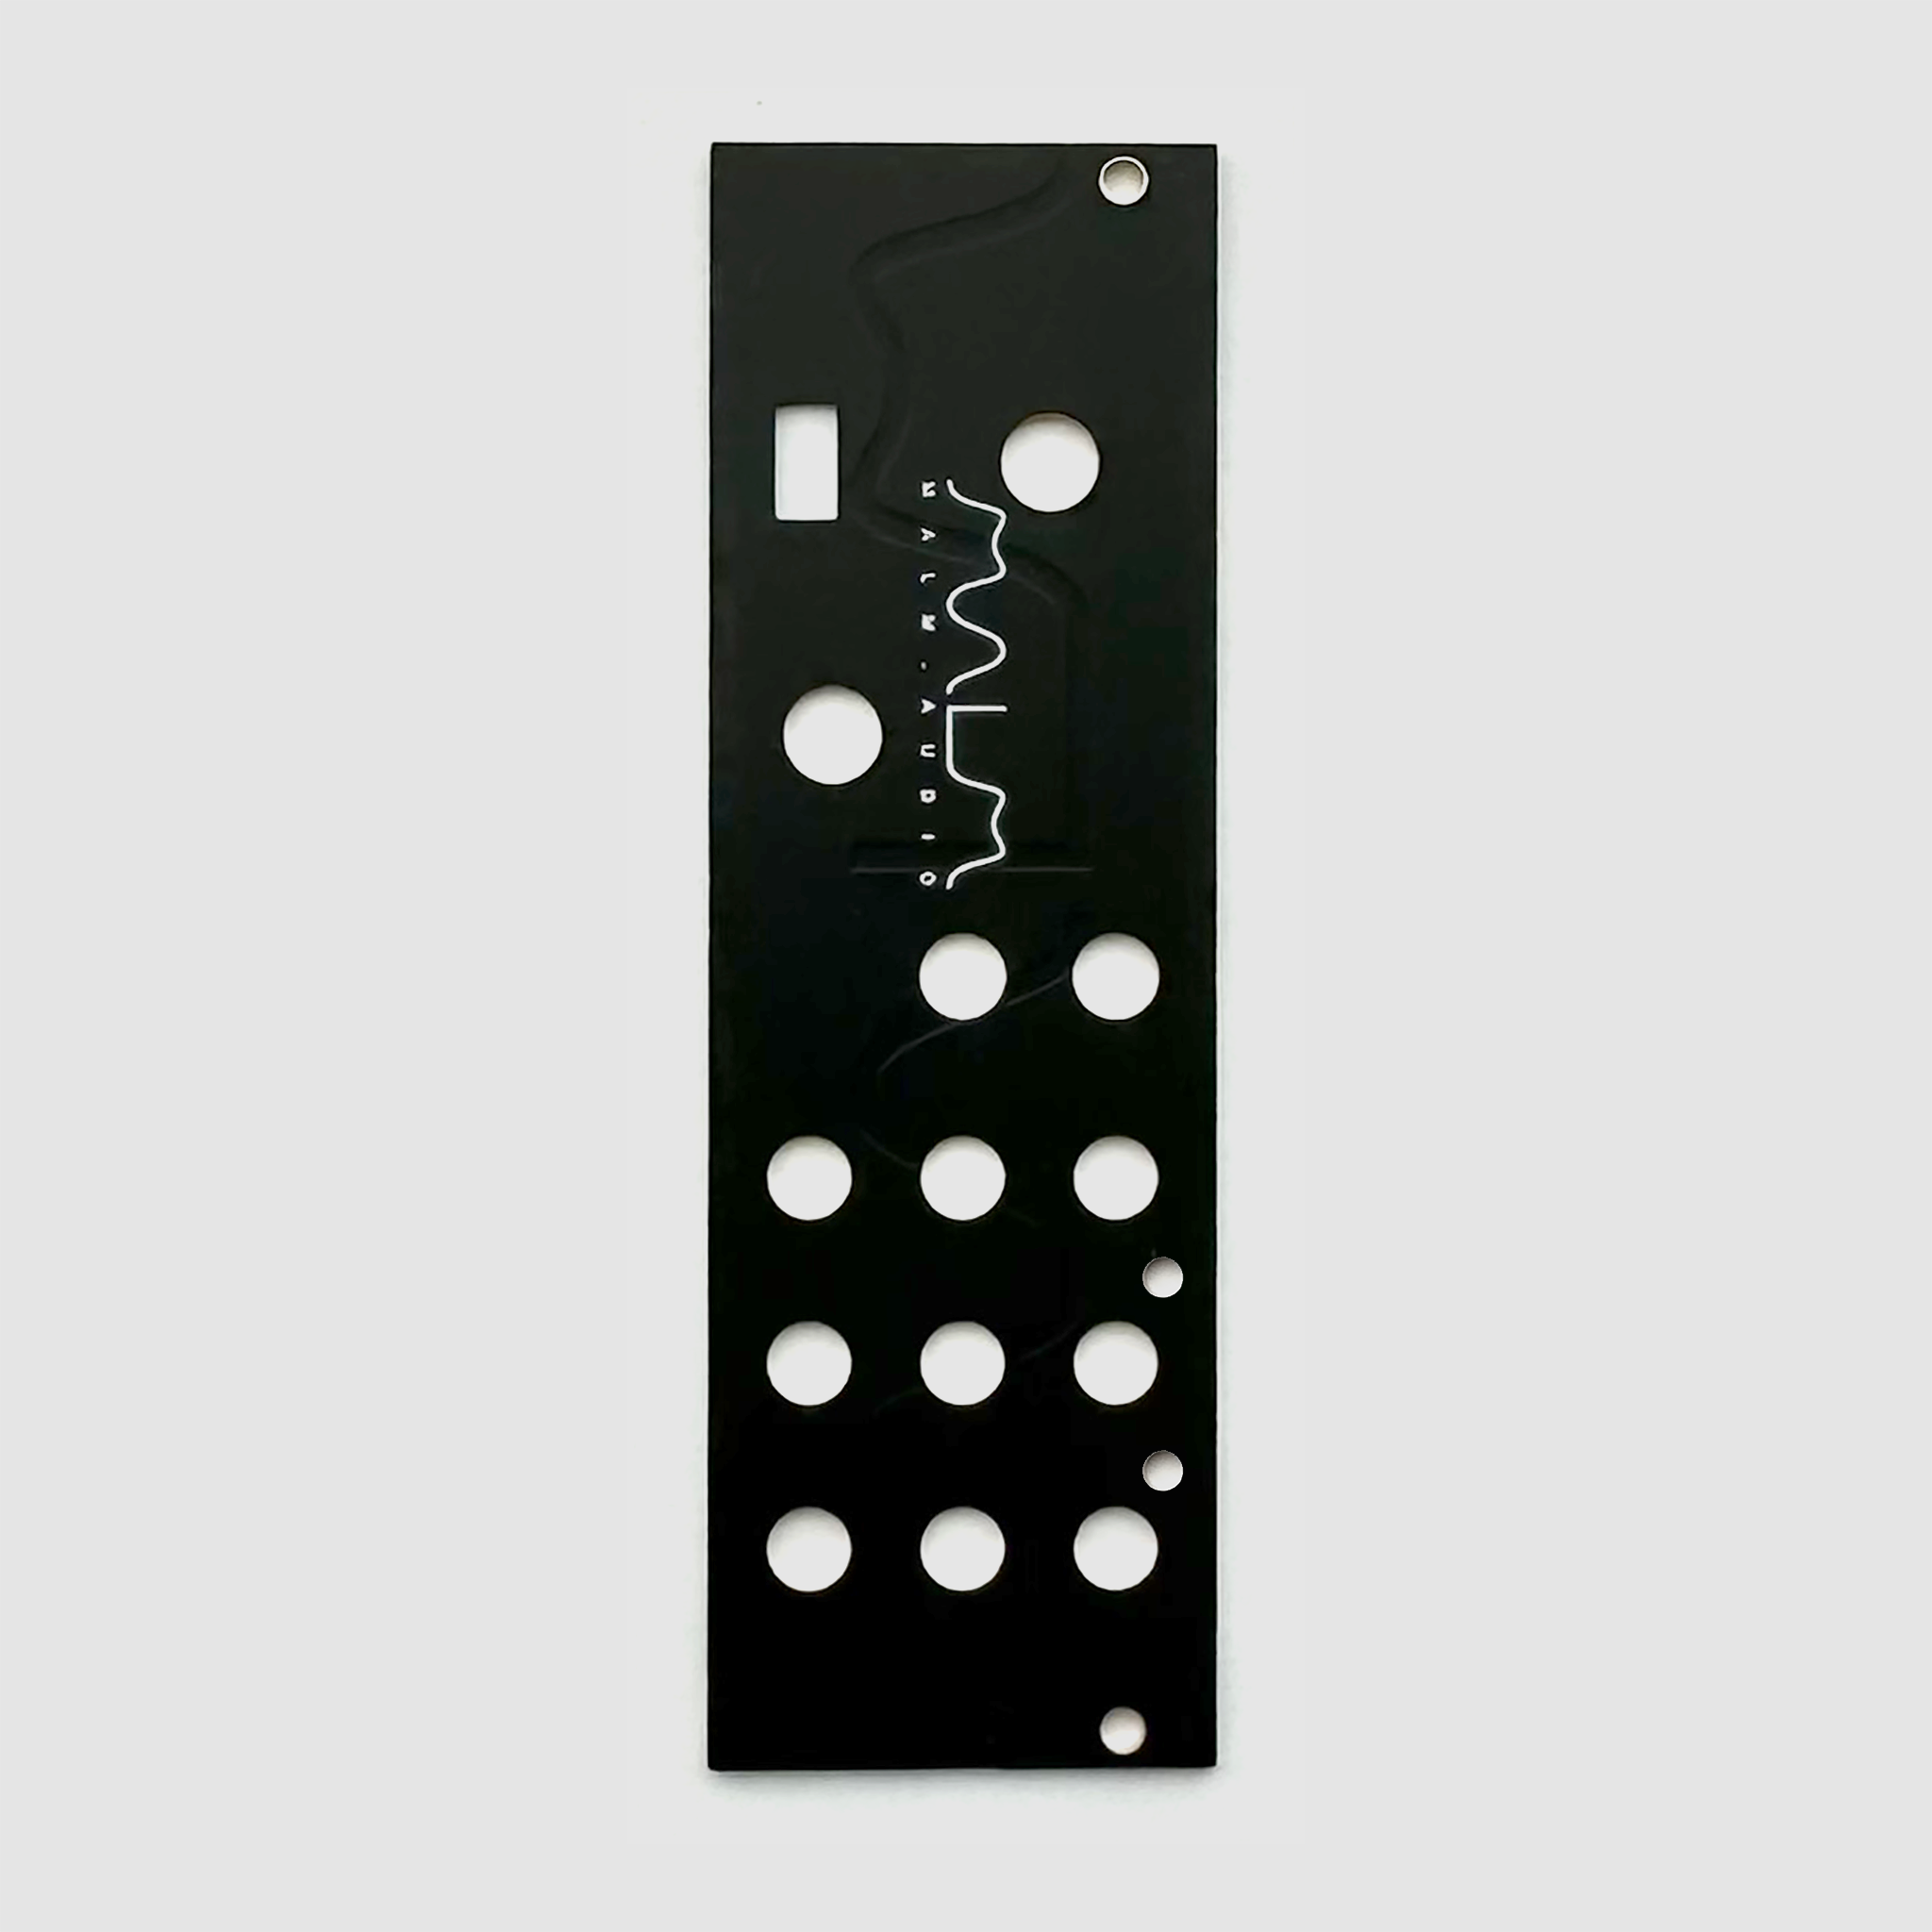 Black panel for Mutable Instruments Ripples 2